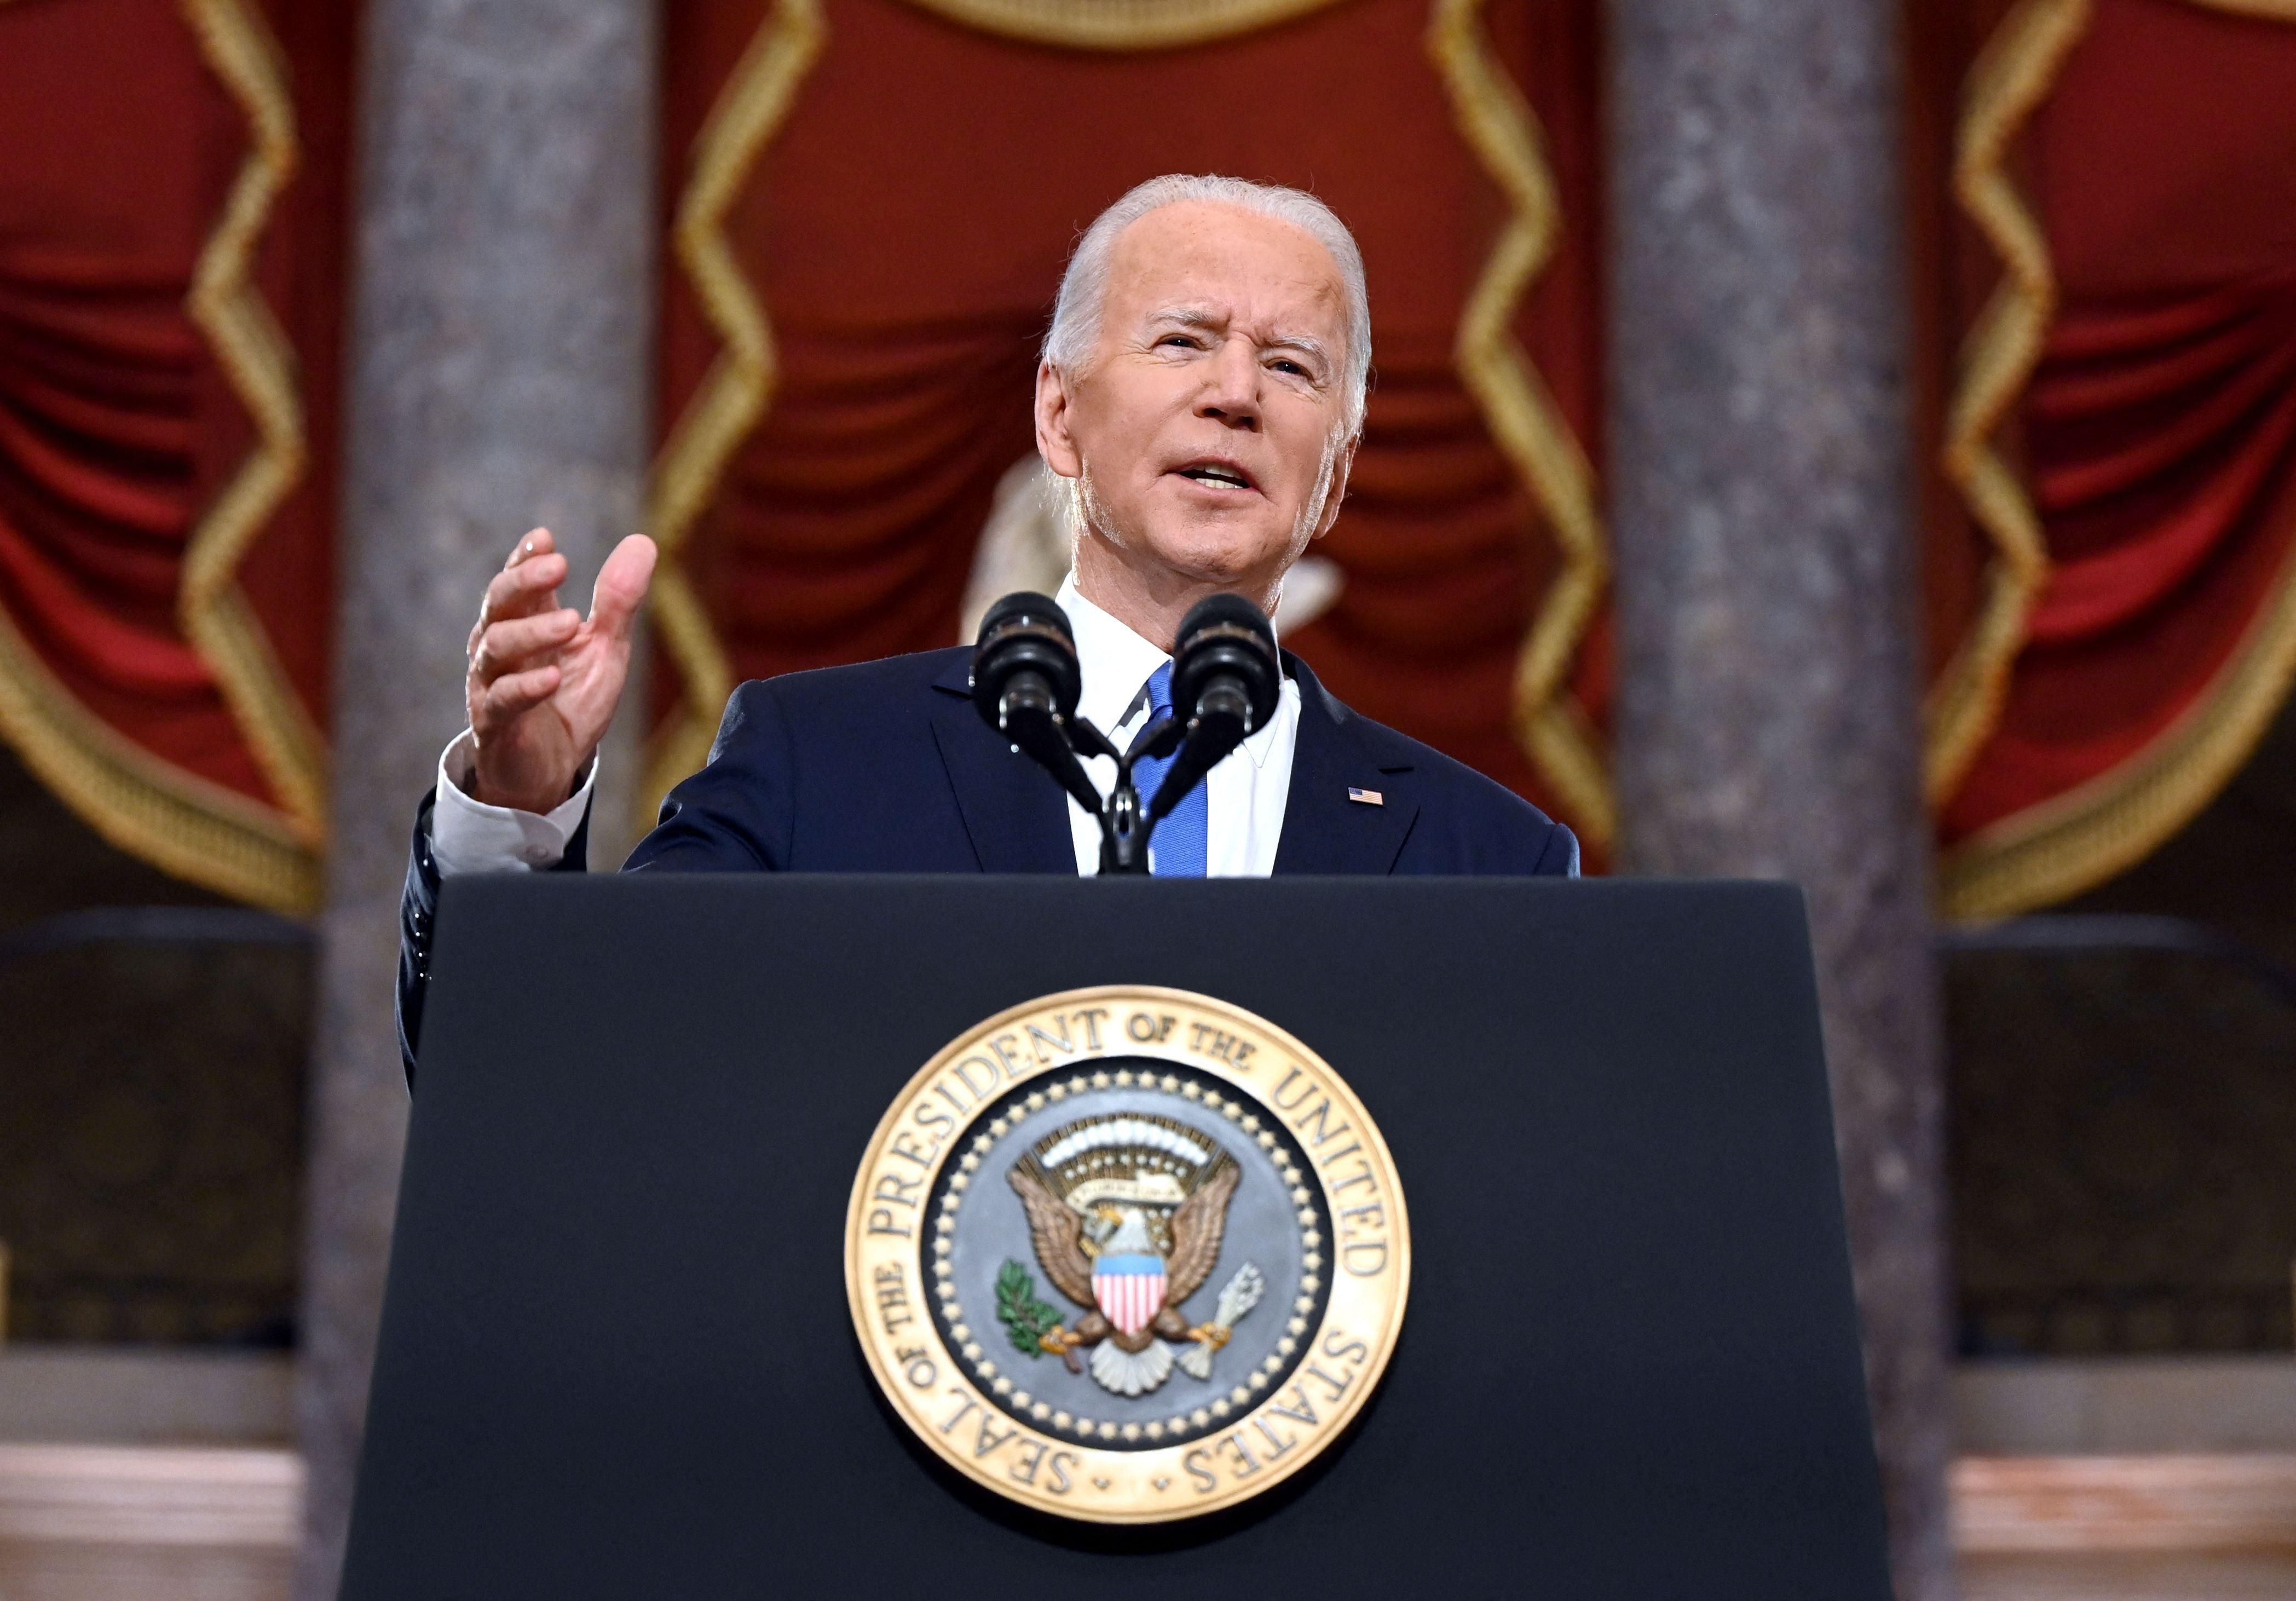 President Joe Biden speaks at the U.S. Capitol on January 6, 2022, to mark the anniversary of last year's attack in Washington, D.C.